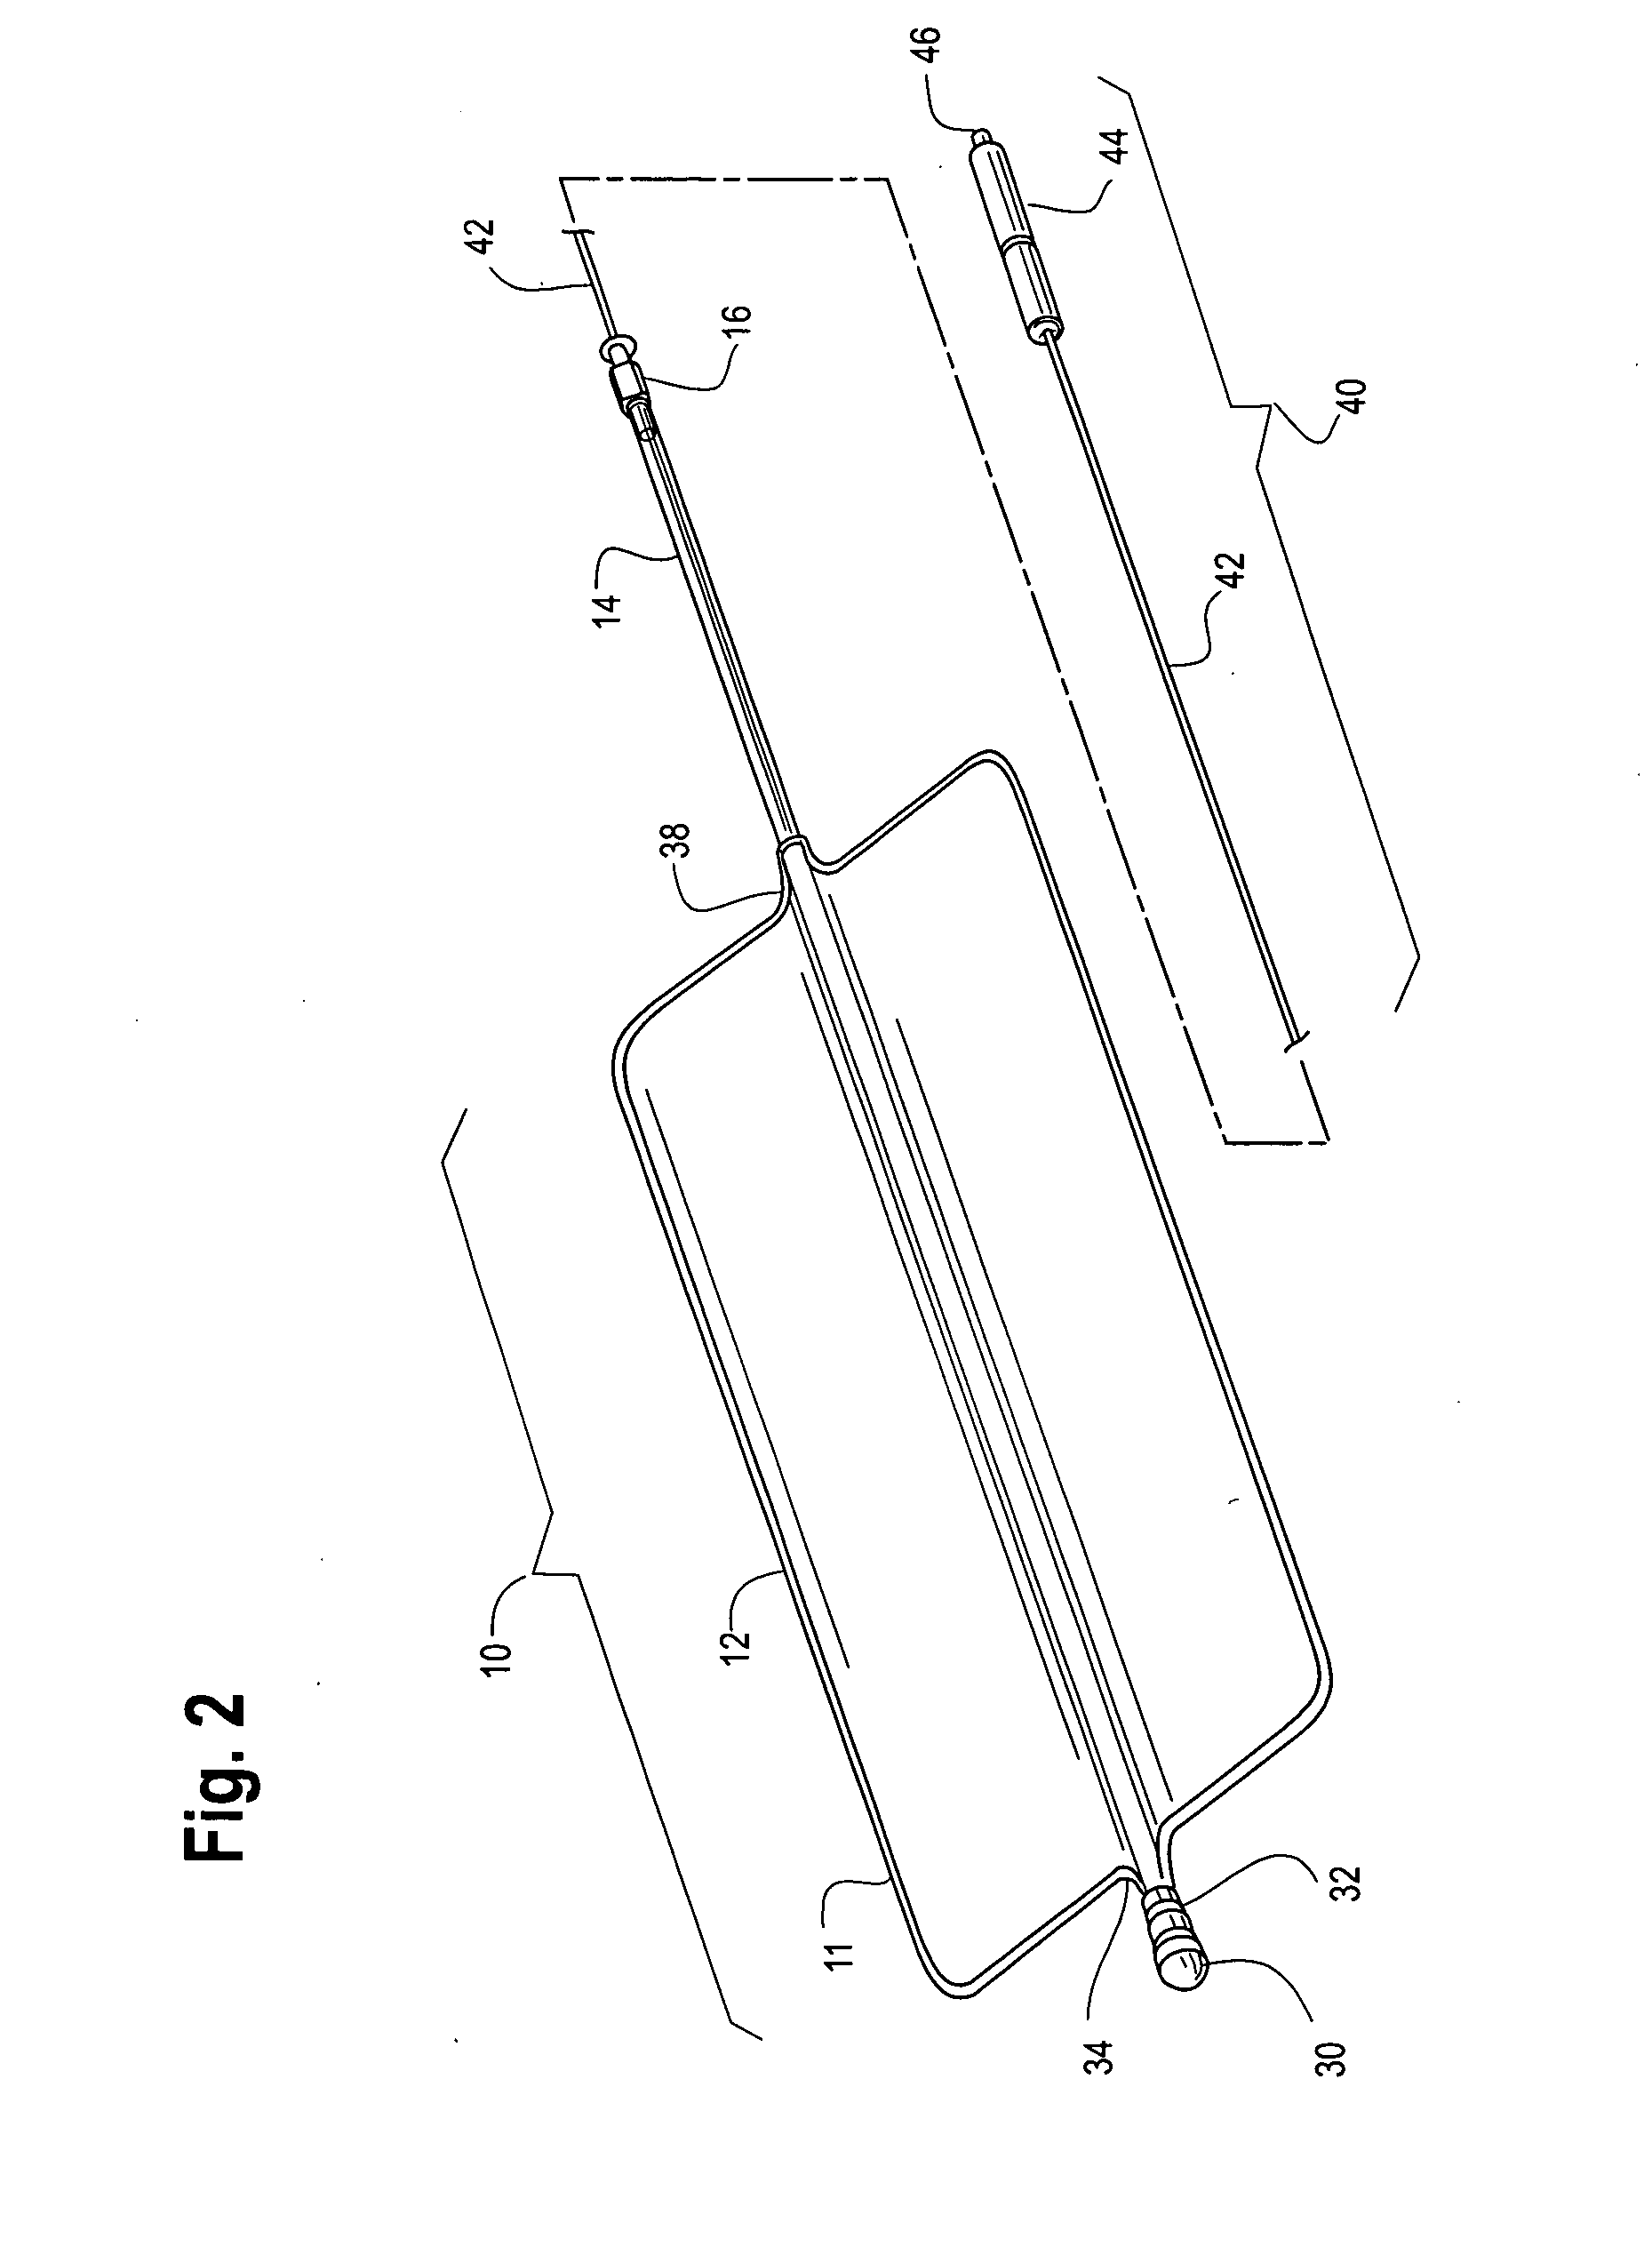 Enhanced system and method for wound track navigation and hemorrhage control